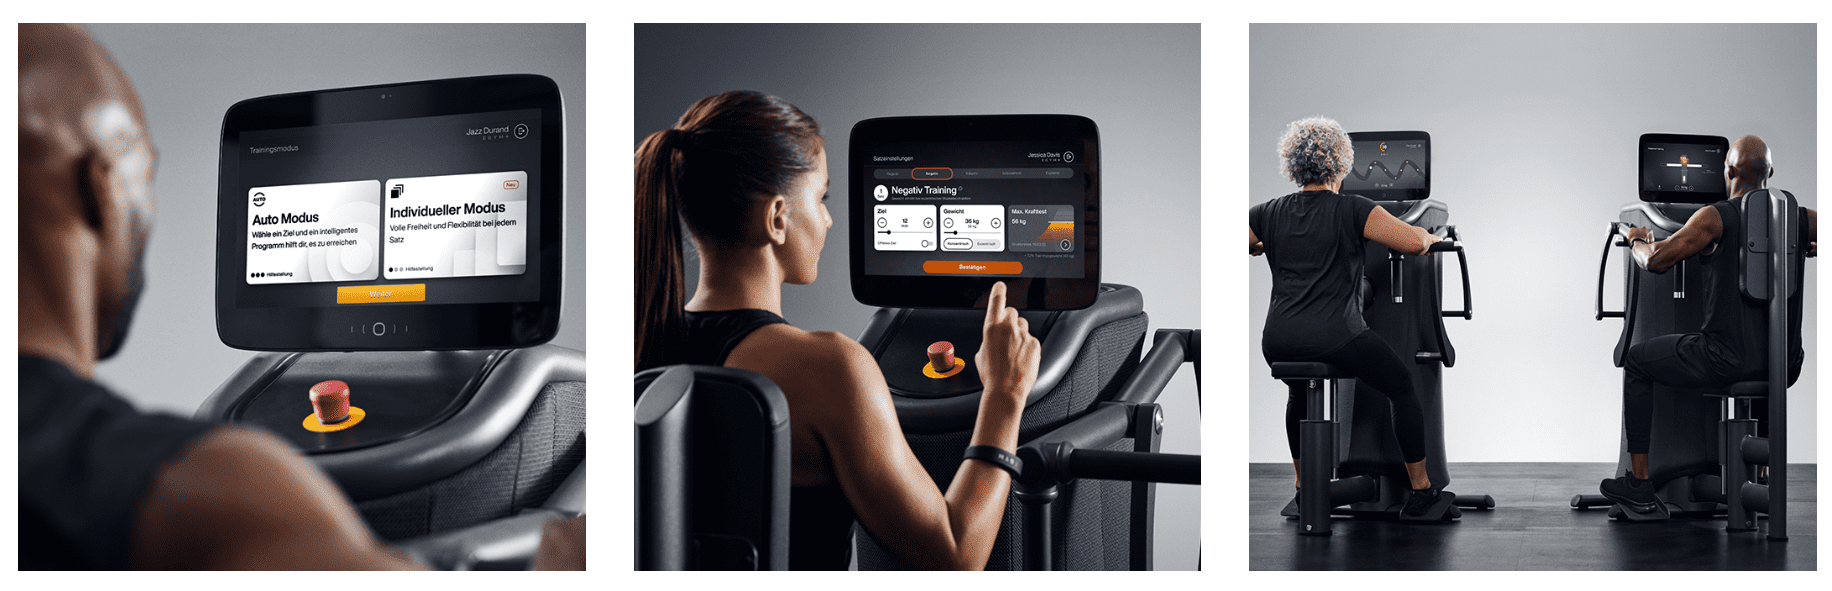 A screenshot of the E-Gym website. Various users are shown at the fitness equipment. On the left image, a man sets personal workout preferences on the device's display. In the middle image, a woman is choosing between different workout methods, and the third image shows two people exercising side by side with different settings on an identical piece of equipment.